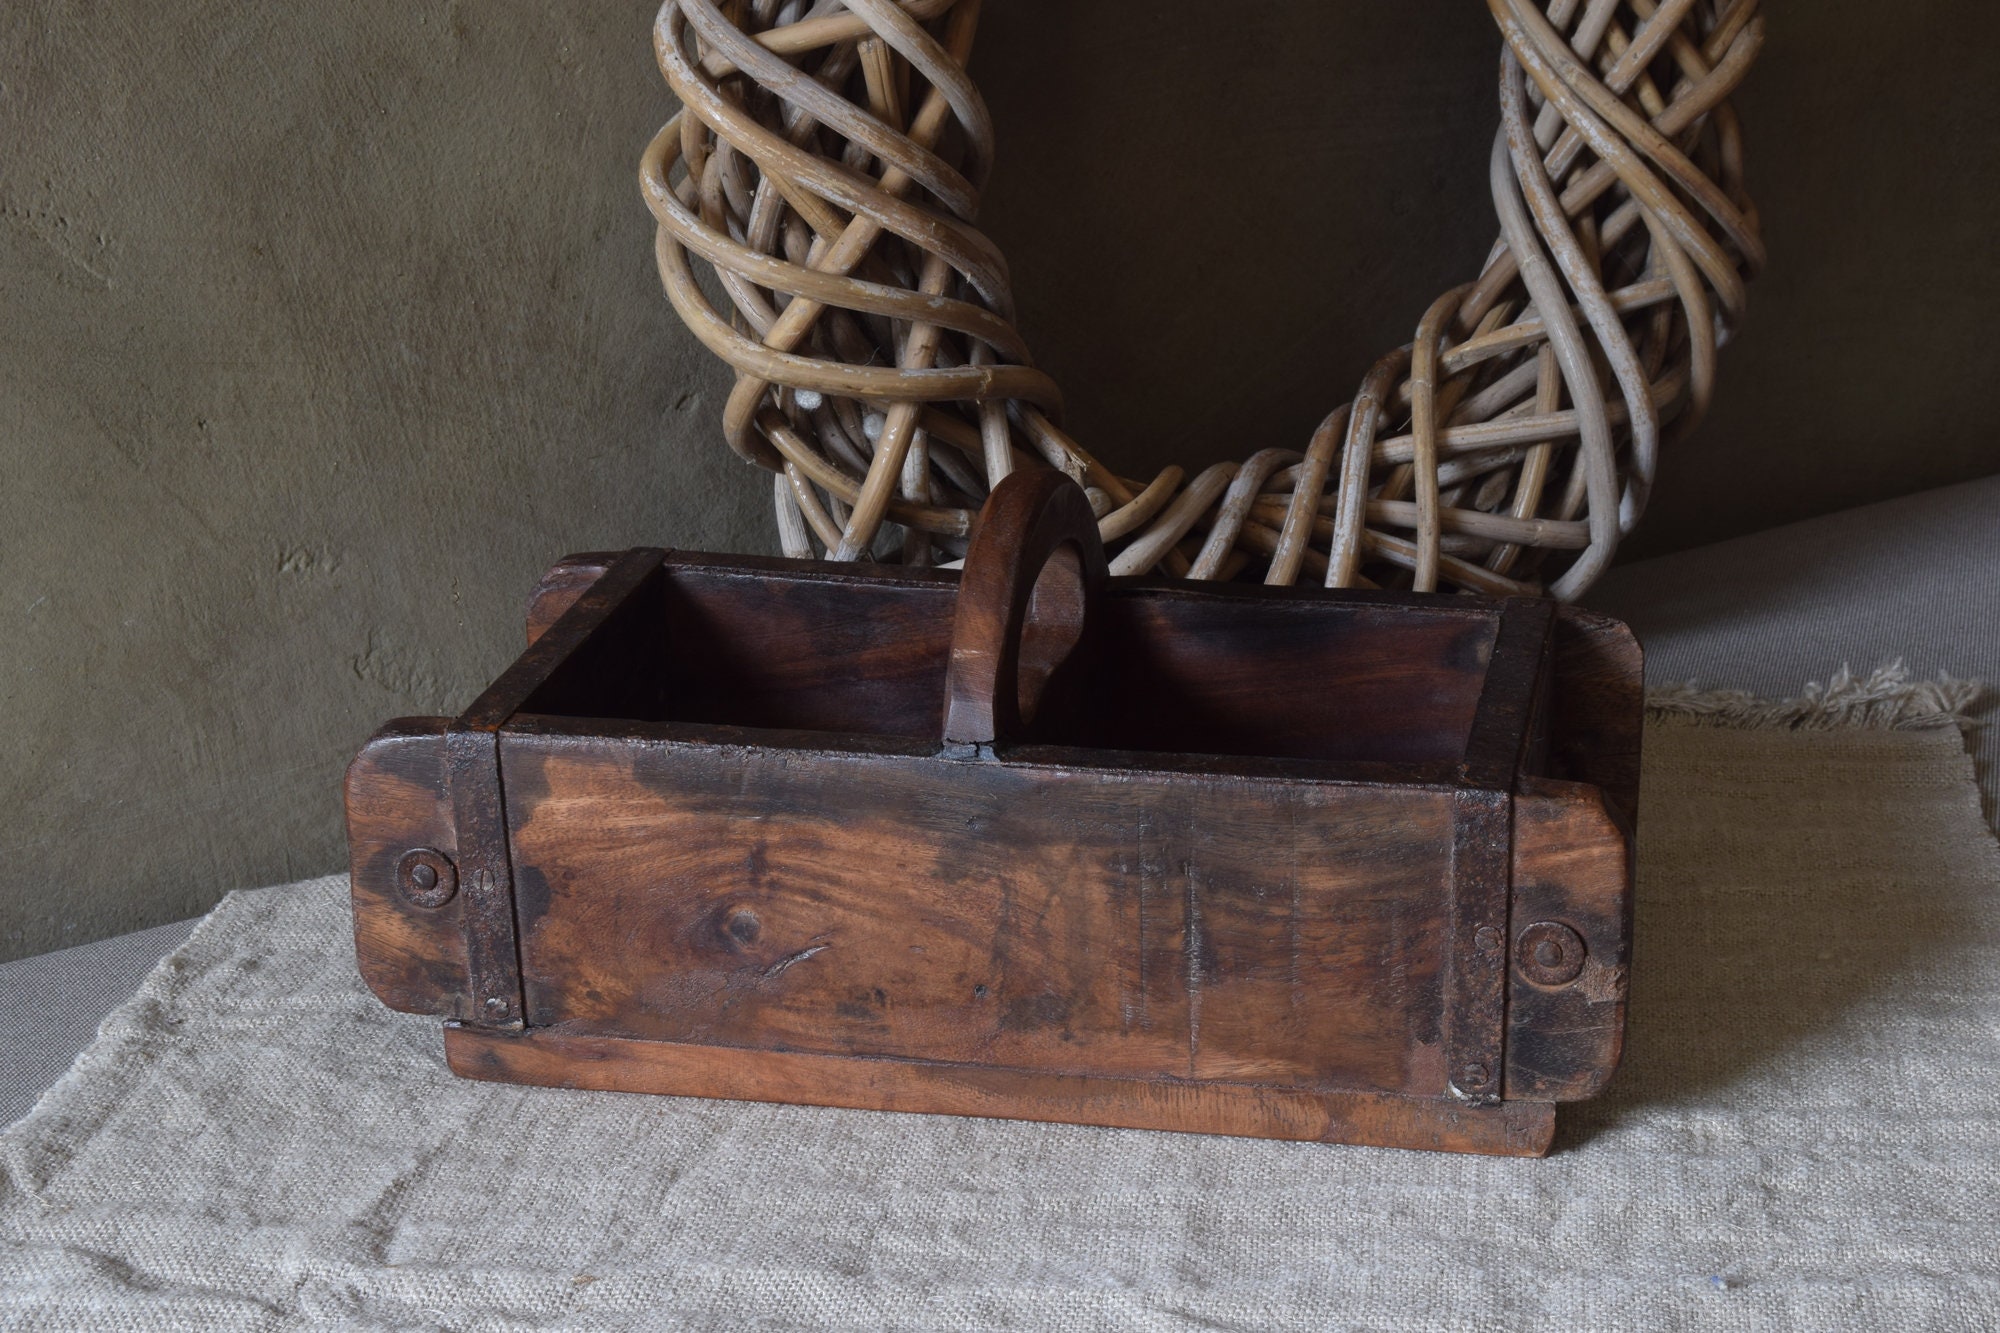 wooden brick mold with iron handles